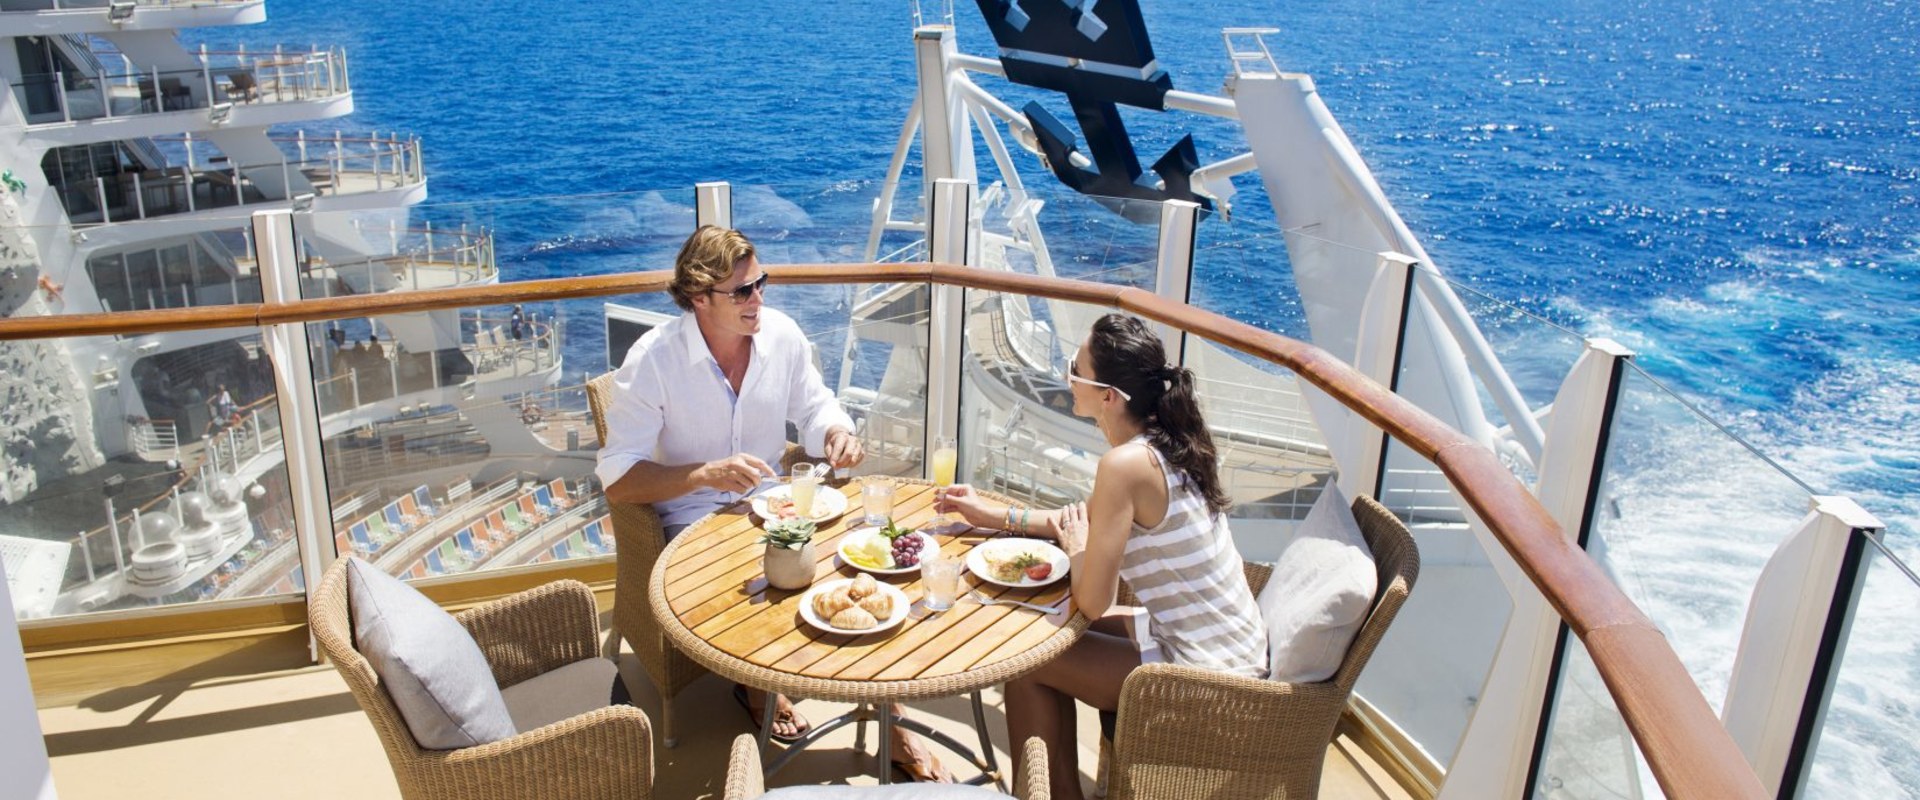 Romantic Cruises: The Perfect Vacation for Couples